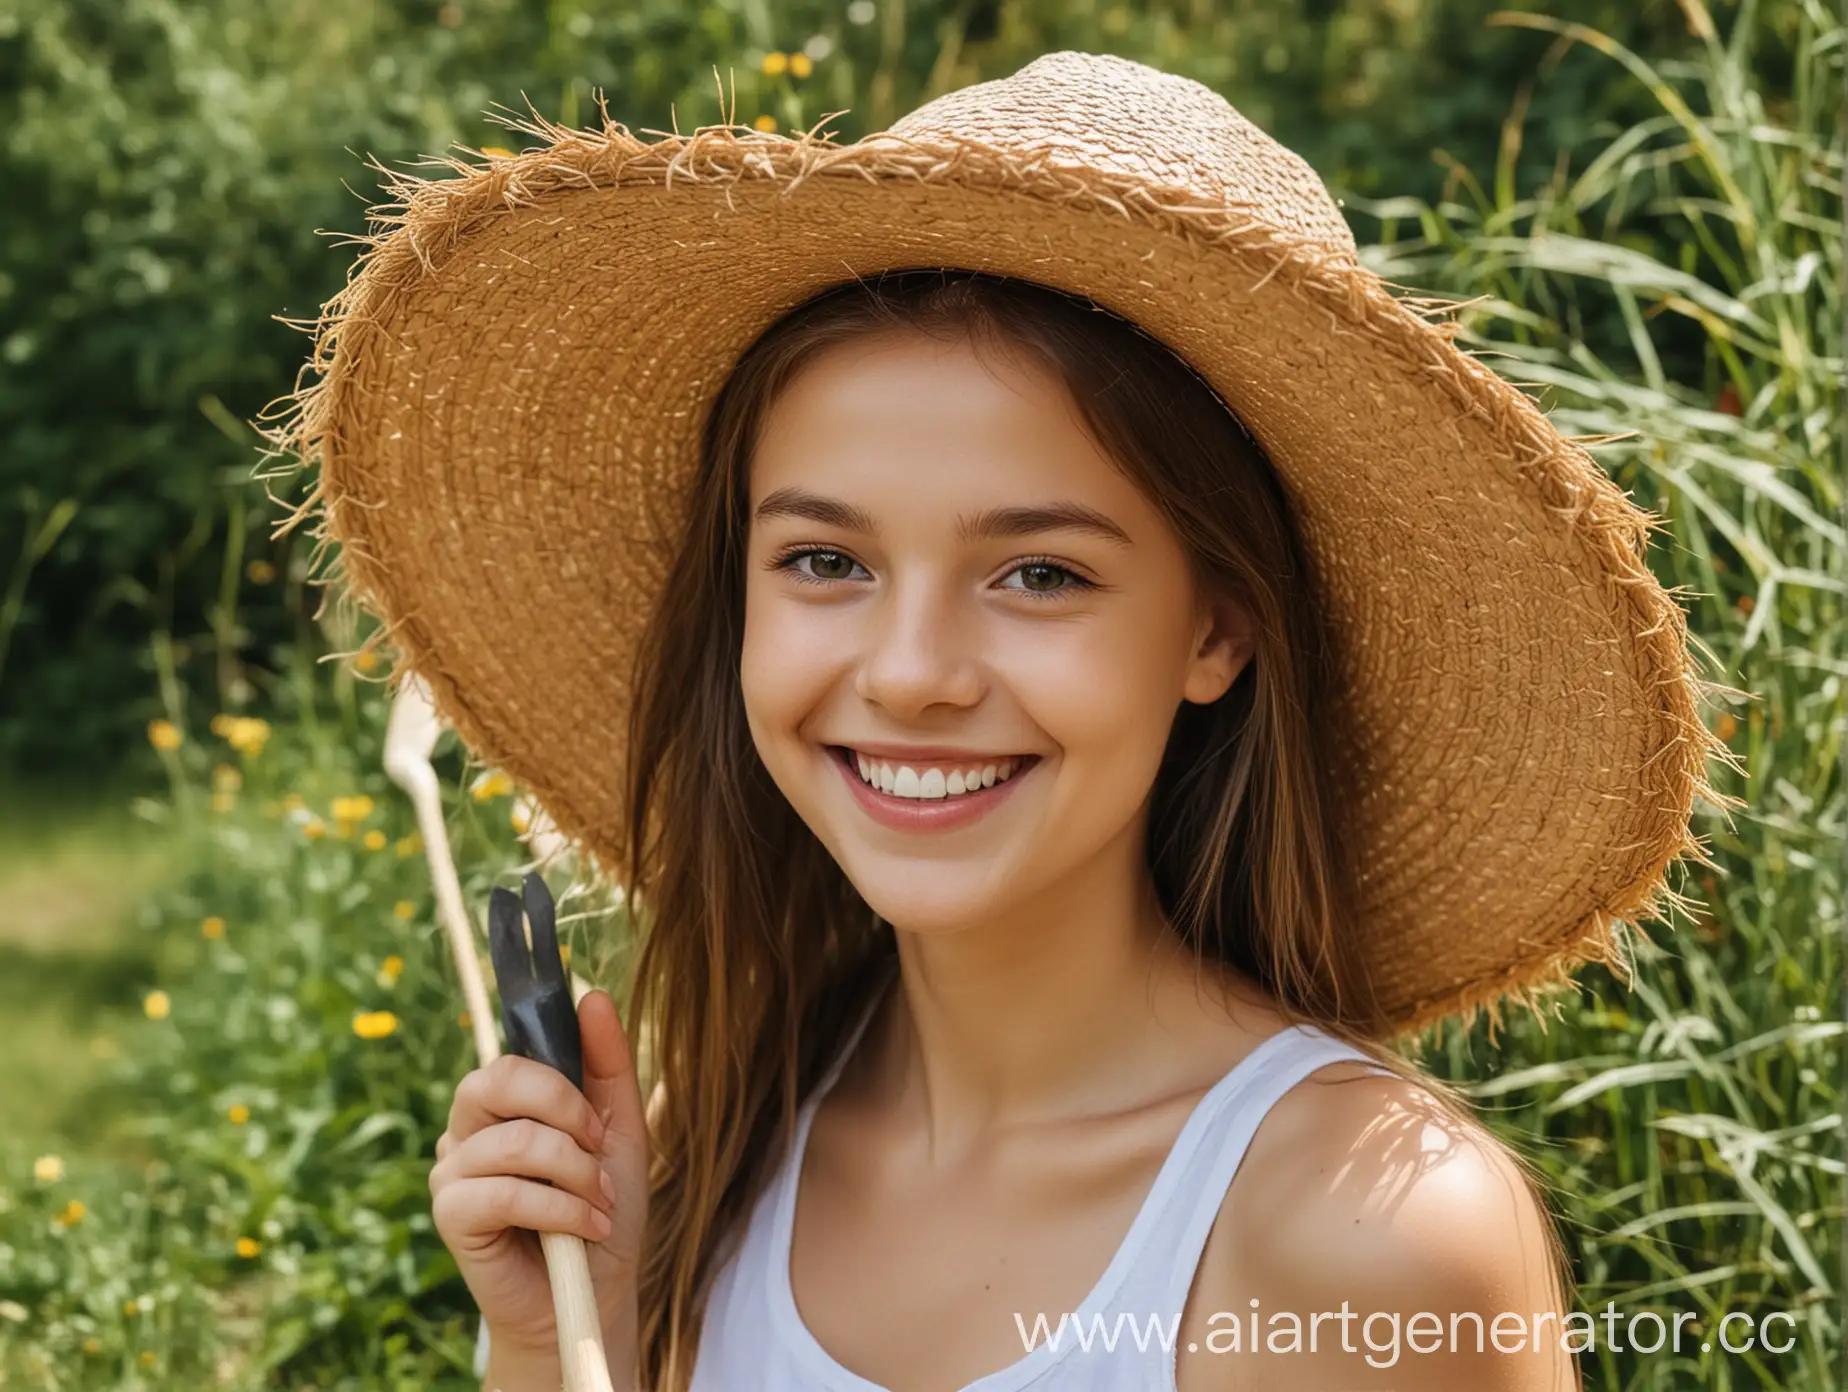 Smiling-Girl-with-Garden-Tools-and-Straw-Hat